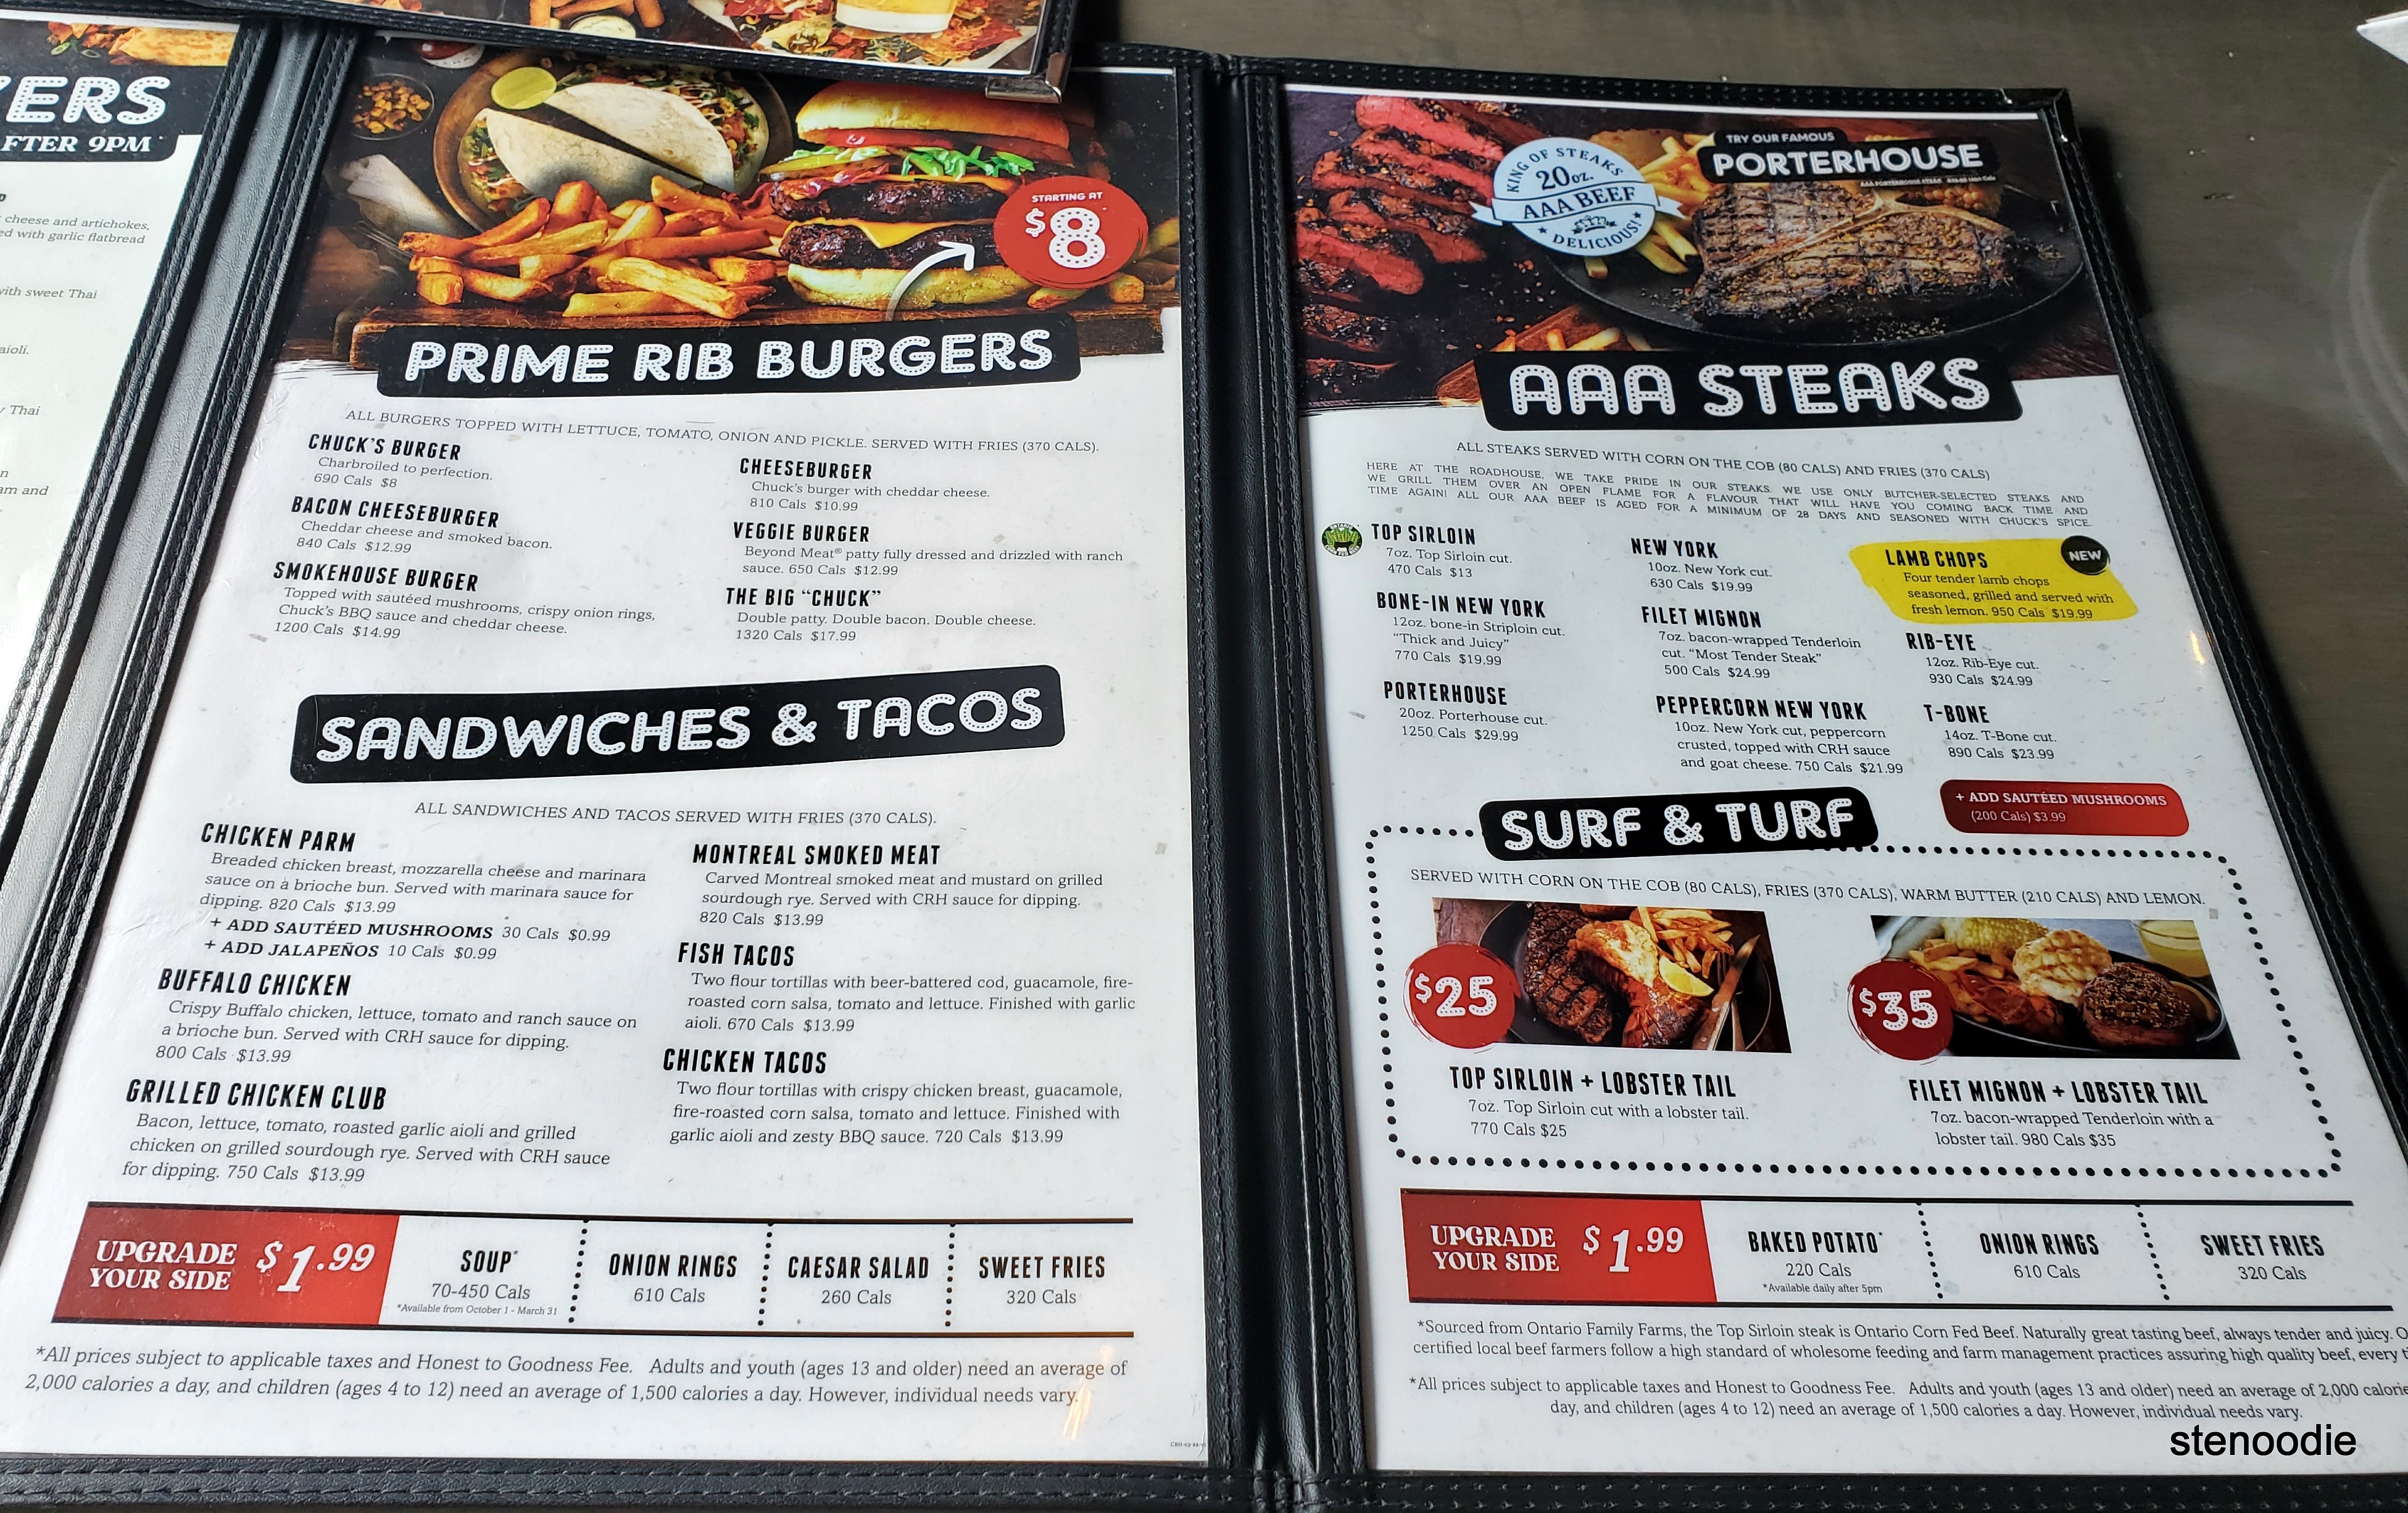 Chucks Roadhouse Bar and Grill menu and prices